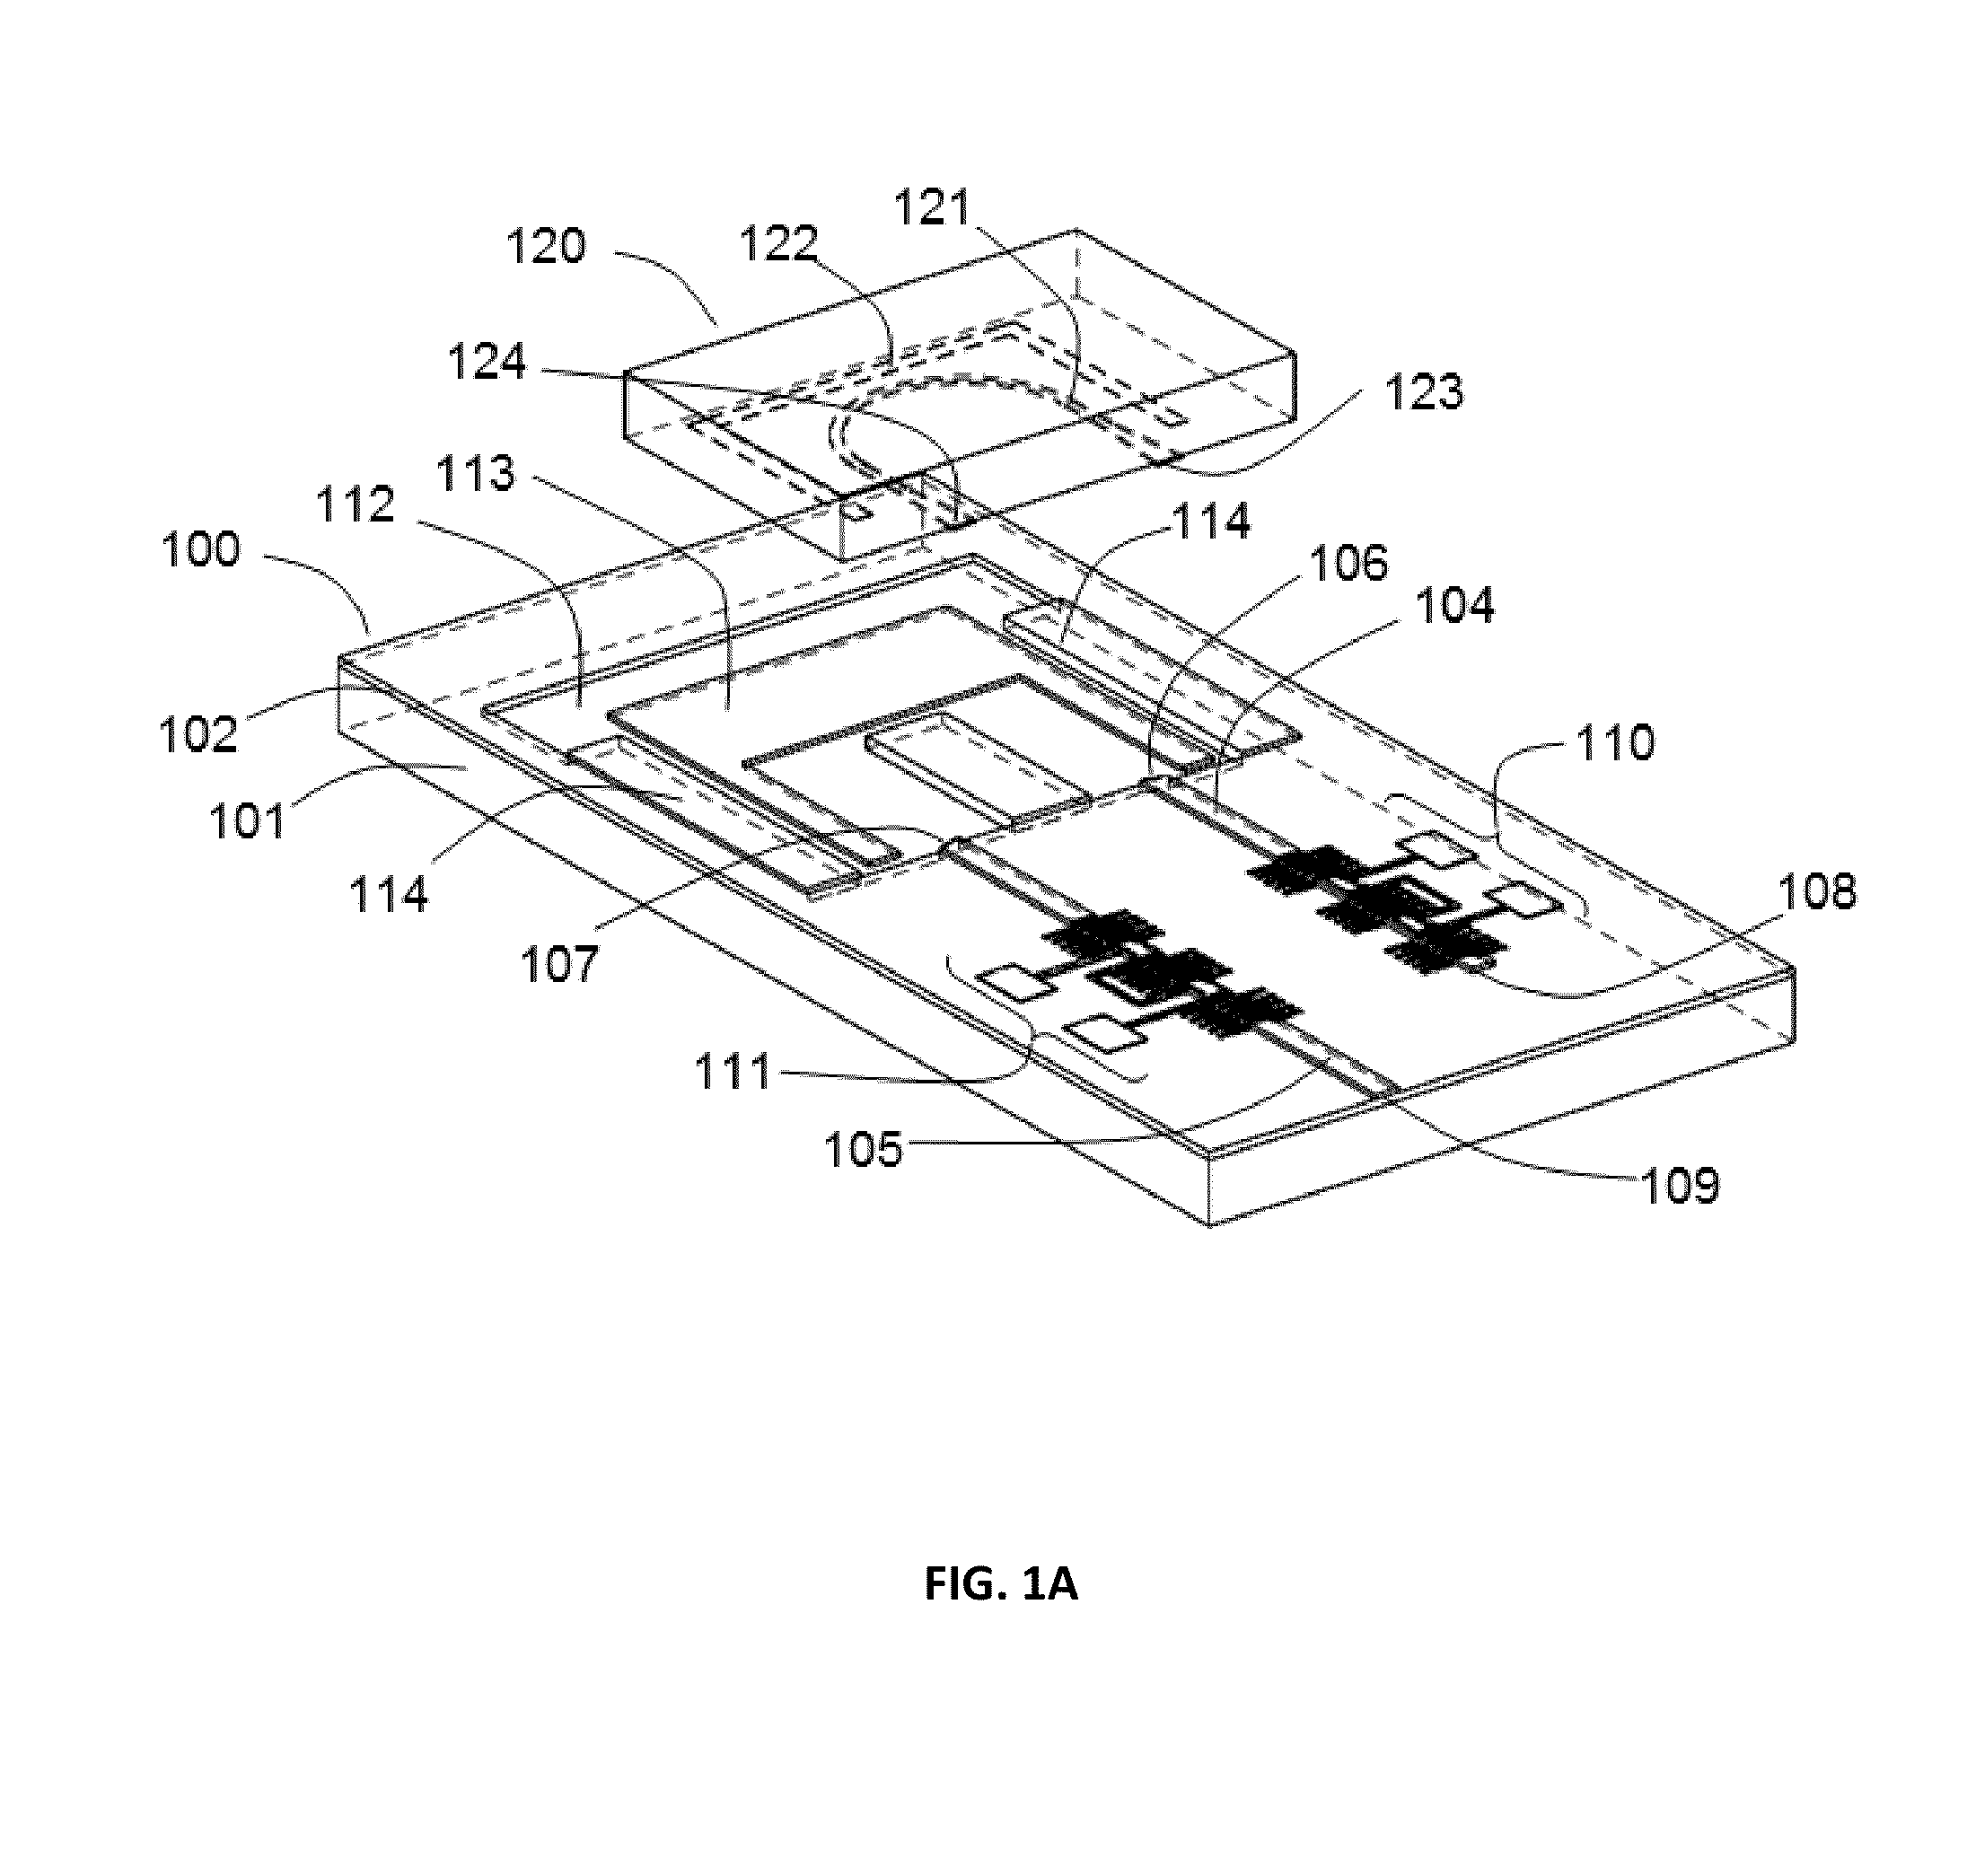 Tunable optical system with hybrid integrated laser